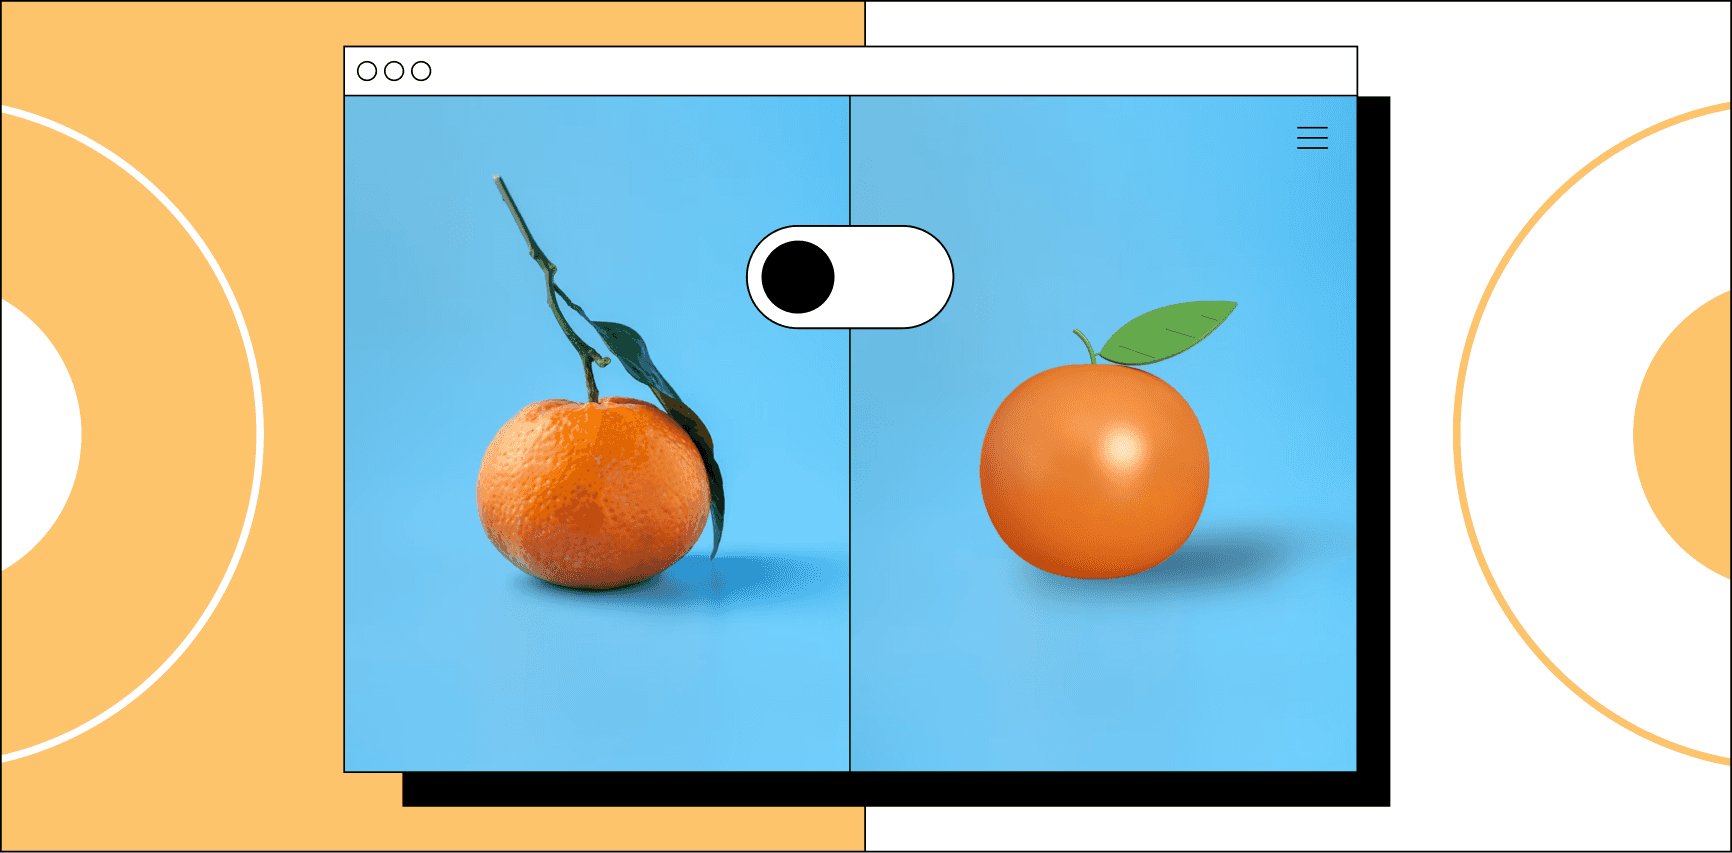 Illustration of two oranges side by side, one a photograph and one an AI-generated image